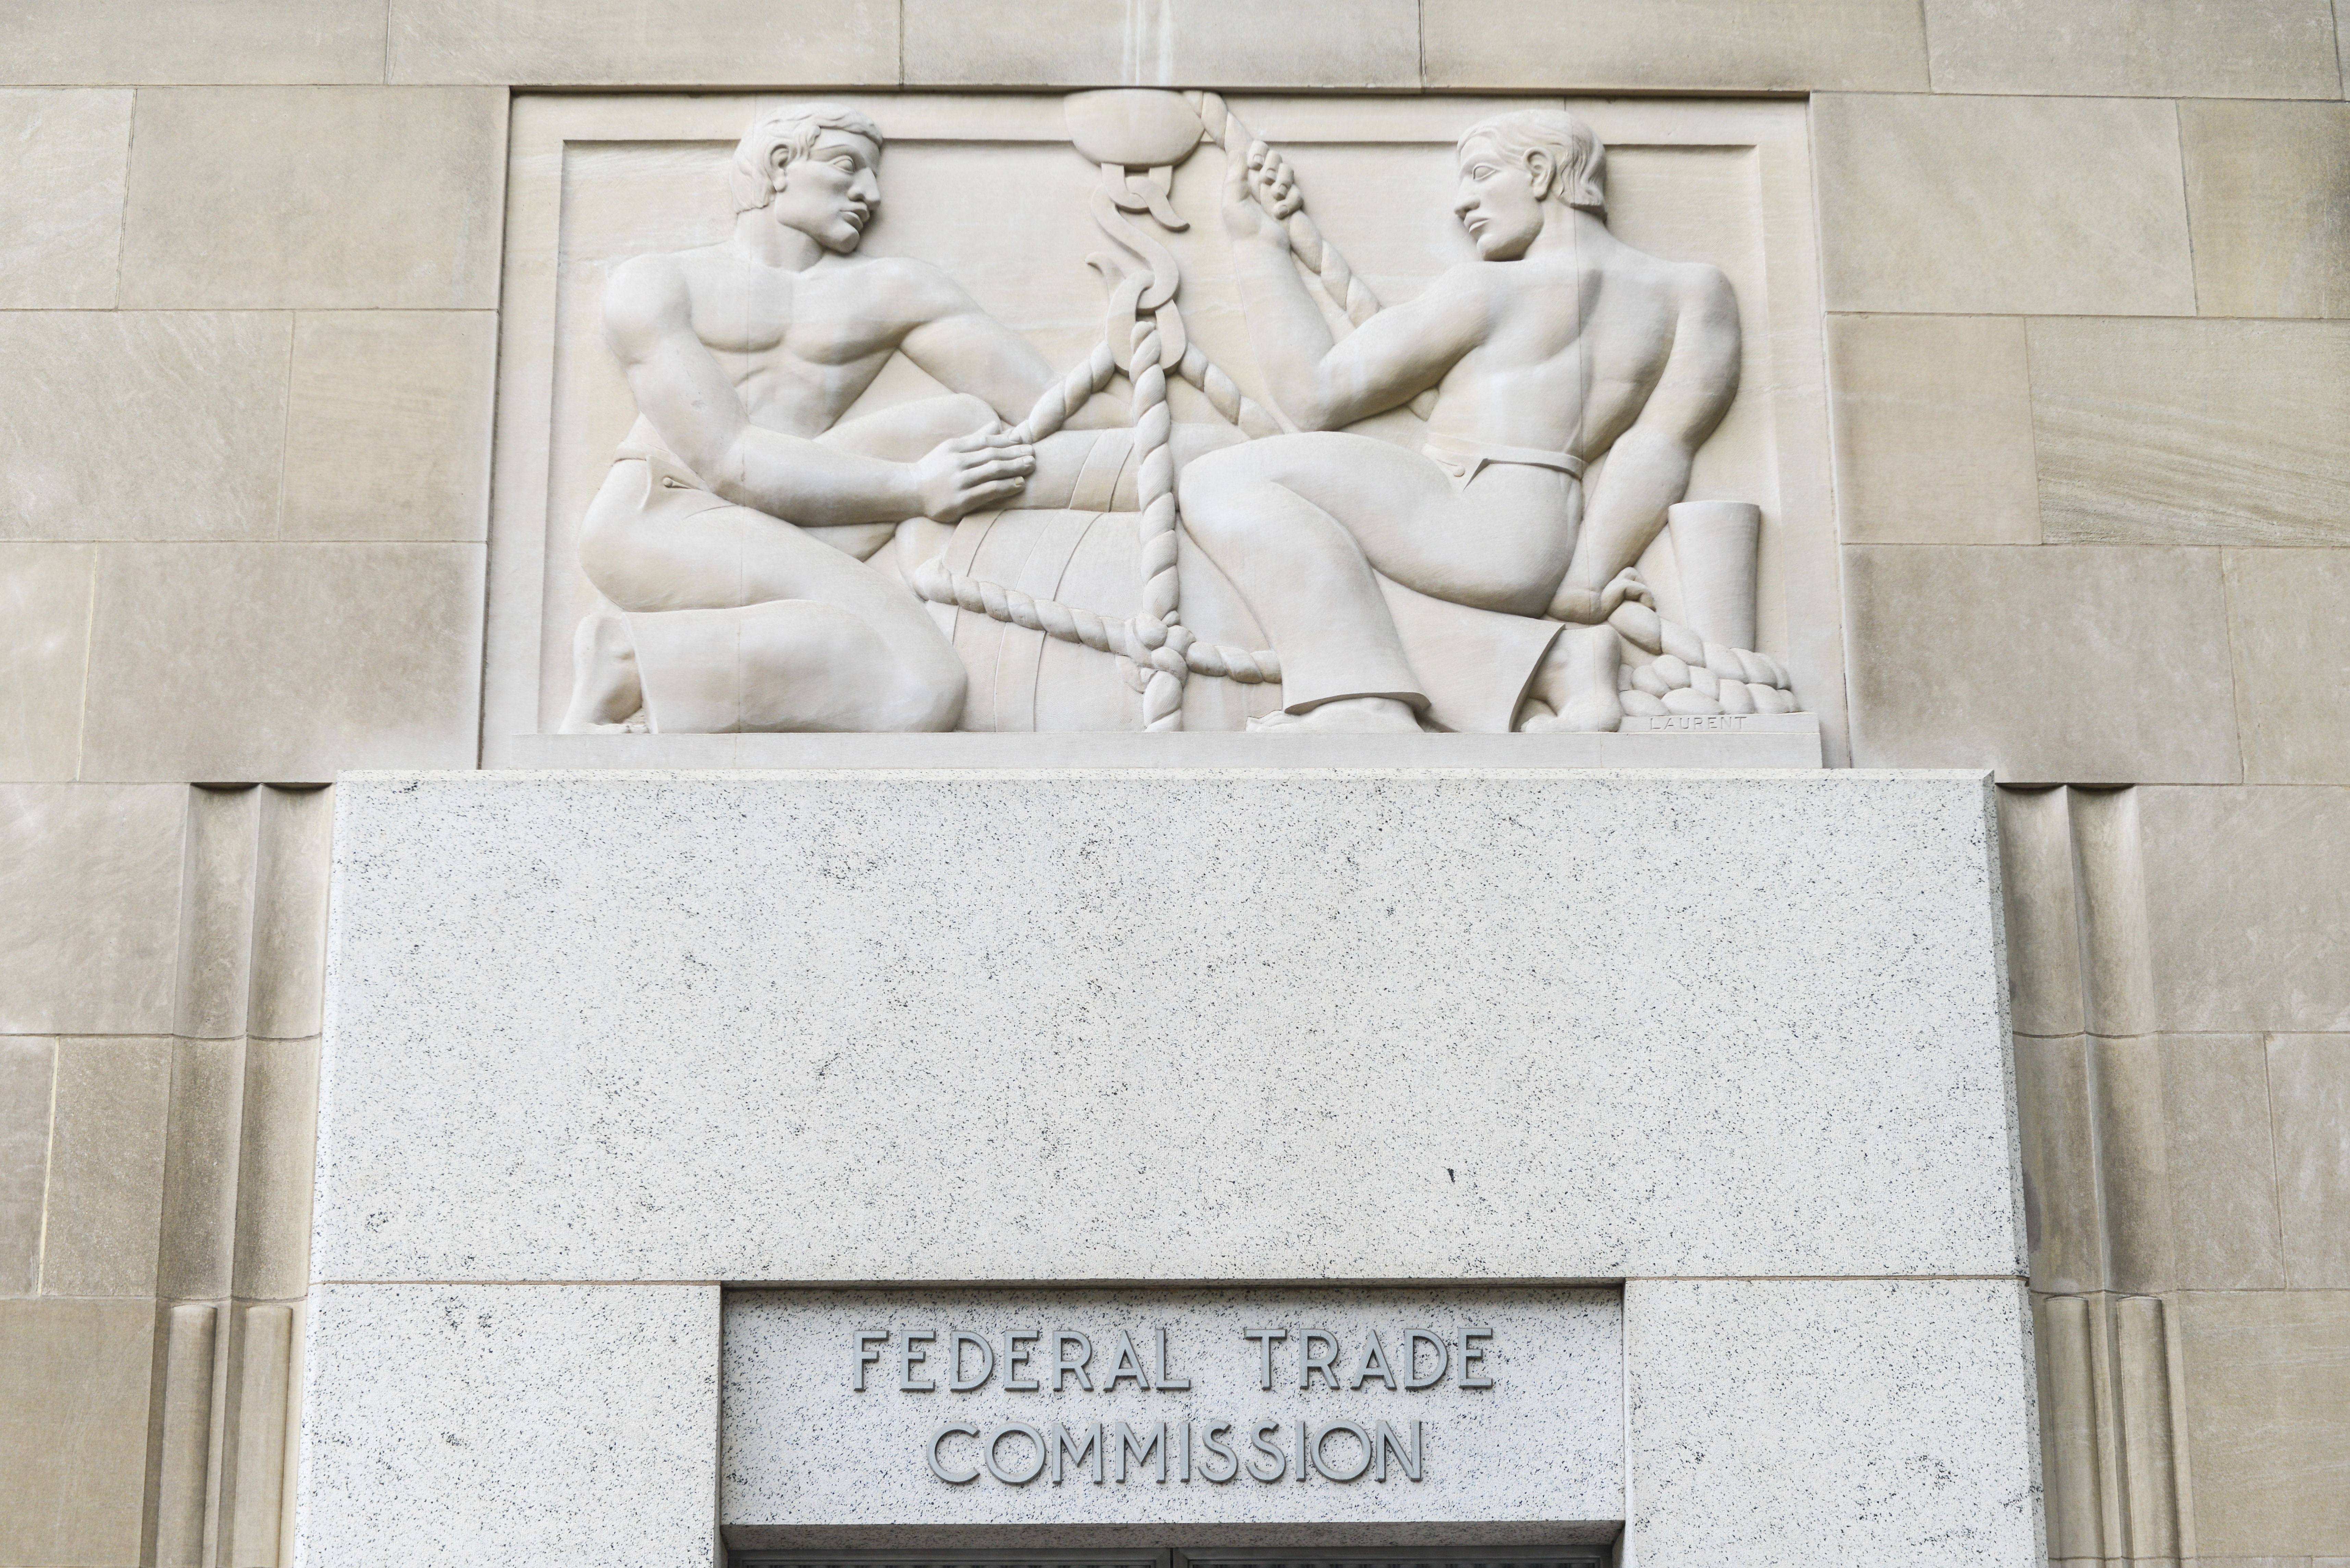 Federal Trade Commission Building in Washington, DC. - Picture courtesy of DollarPhotoClub.com